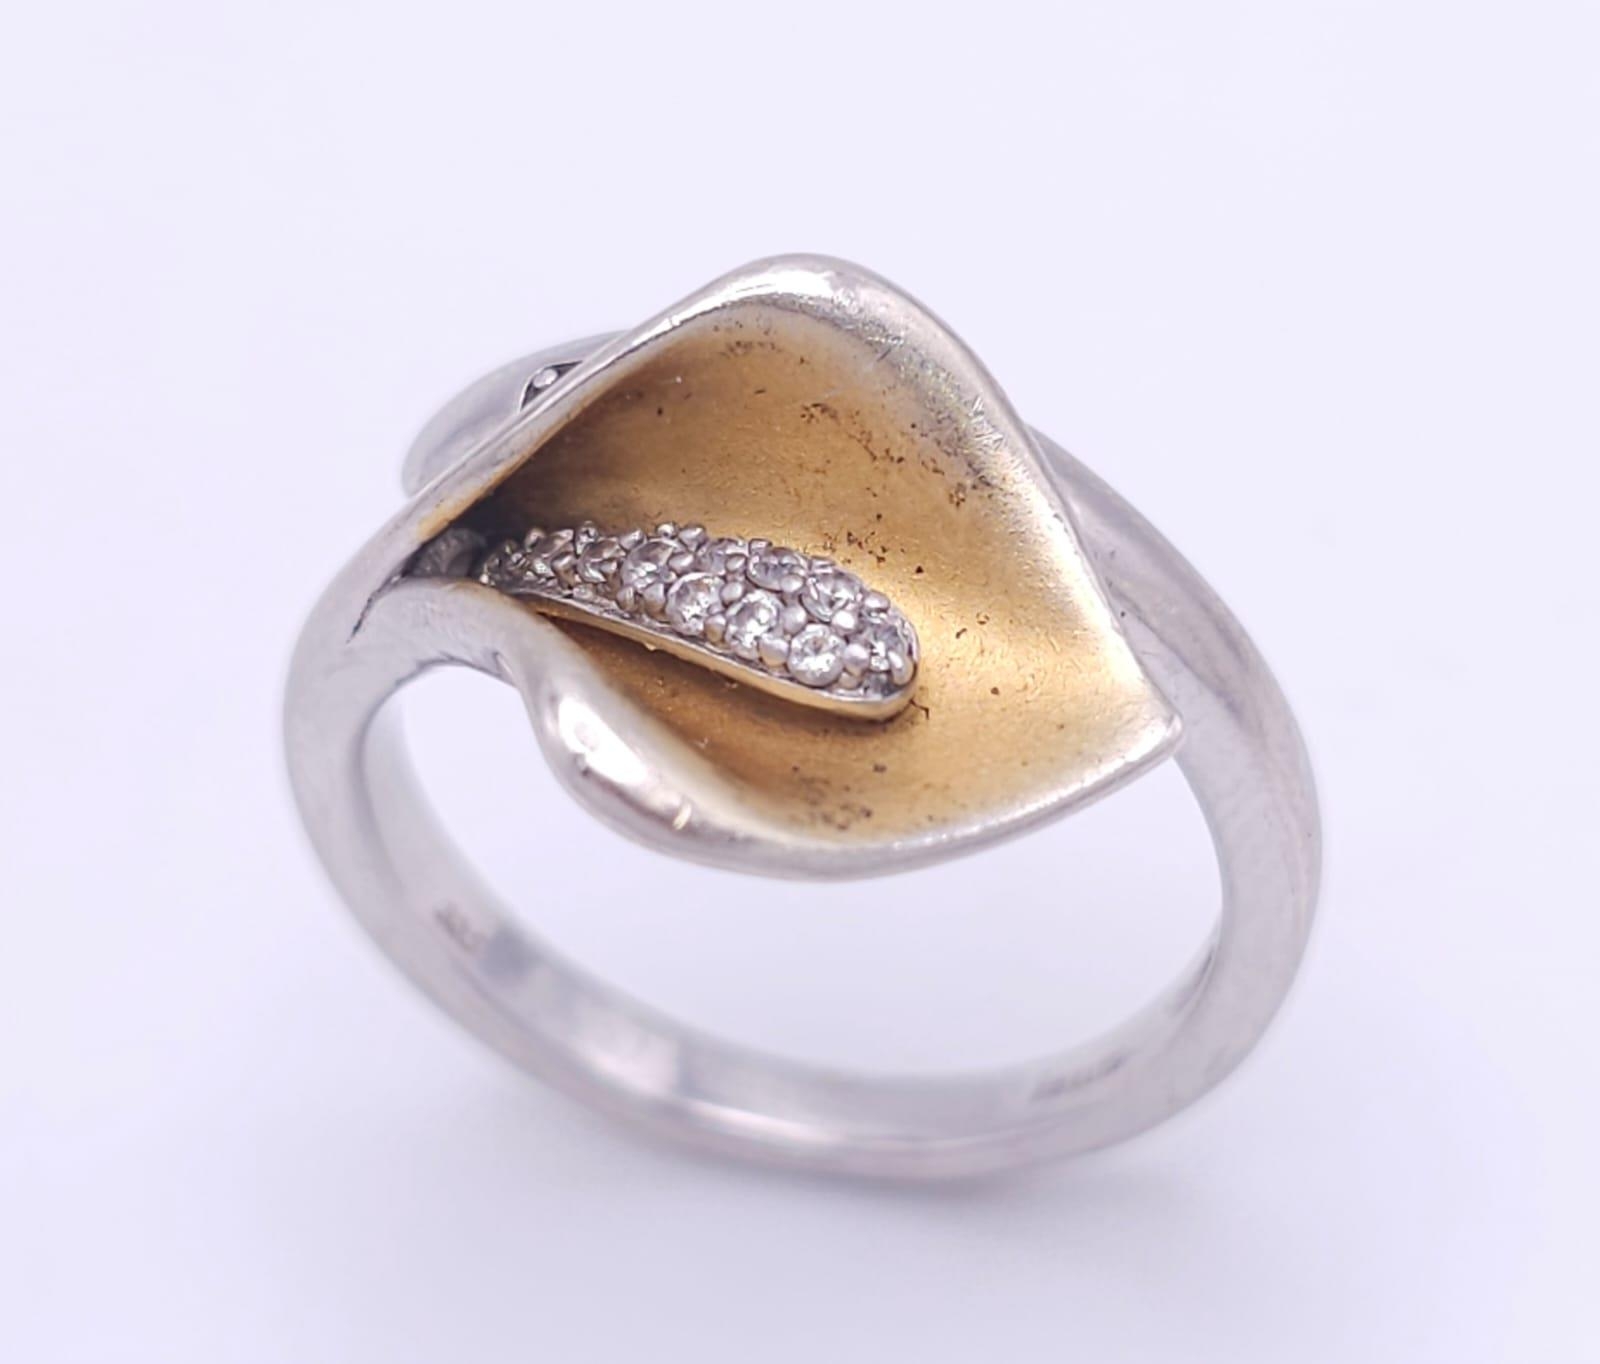 Three Different Style Fancy Sterling Silver Rings - 2 x P, 1 x N. 21.2g total weight. Ref: 016551. - Image 15 of 19